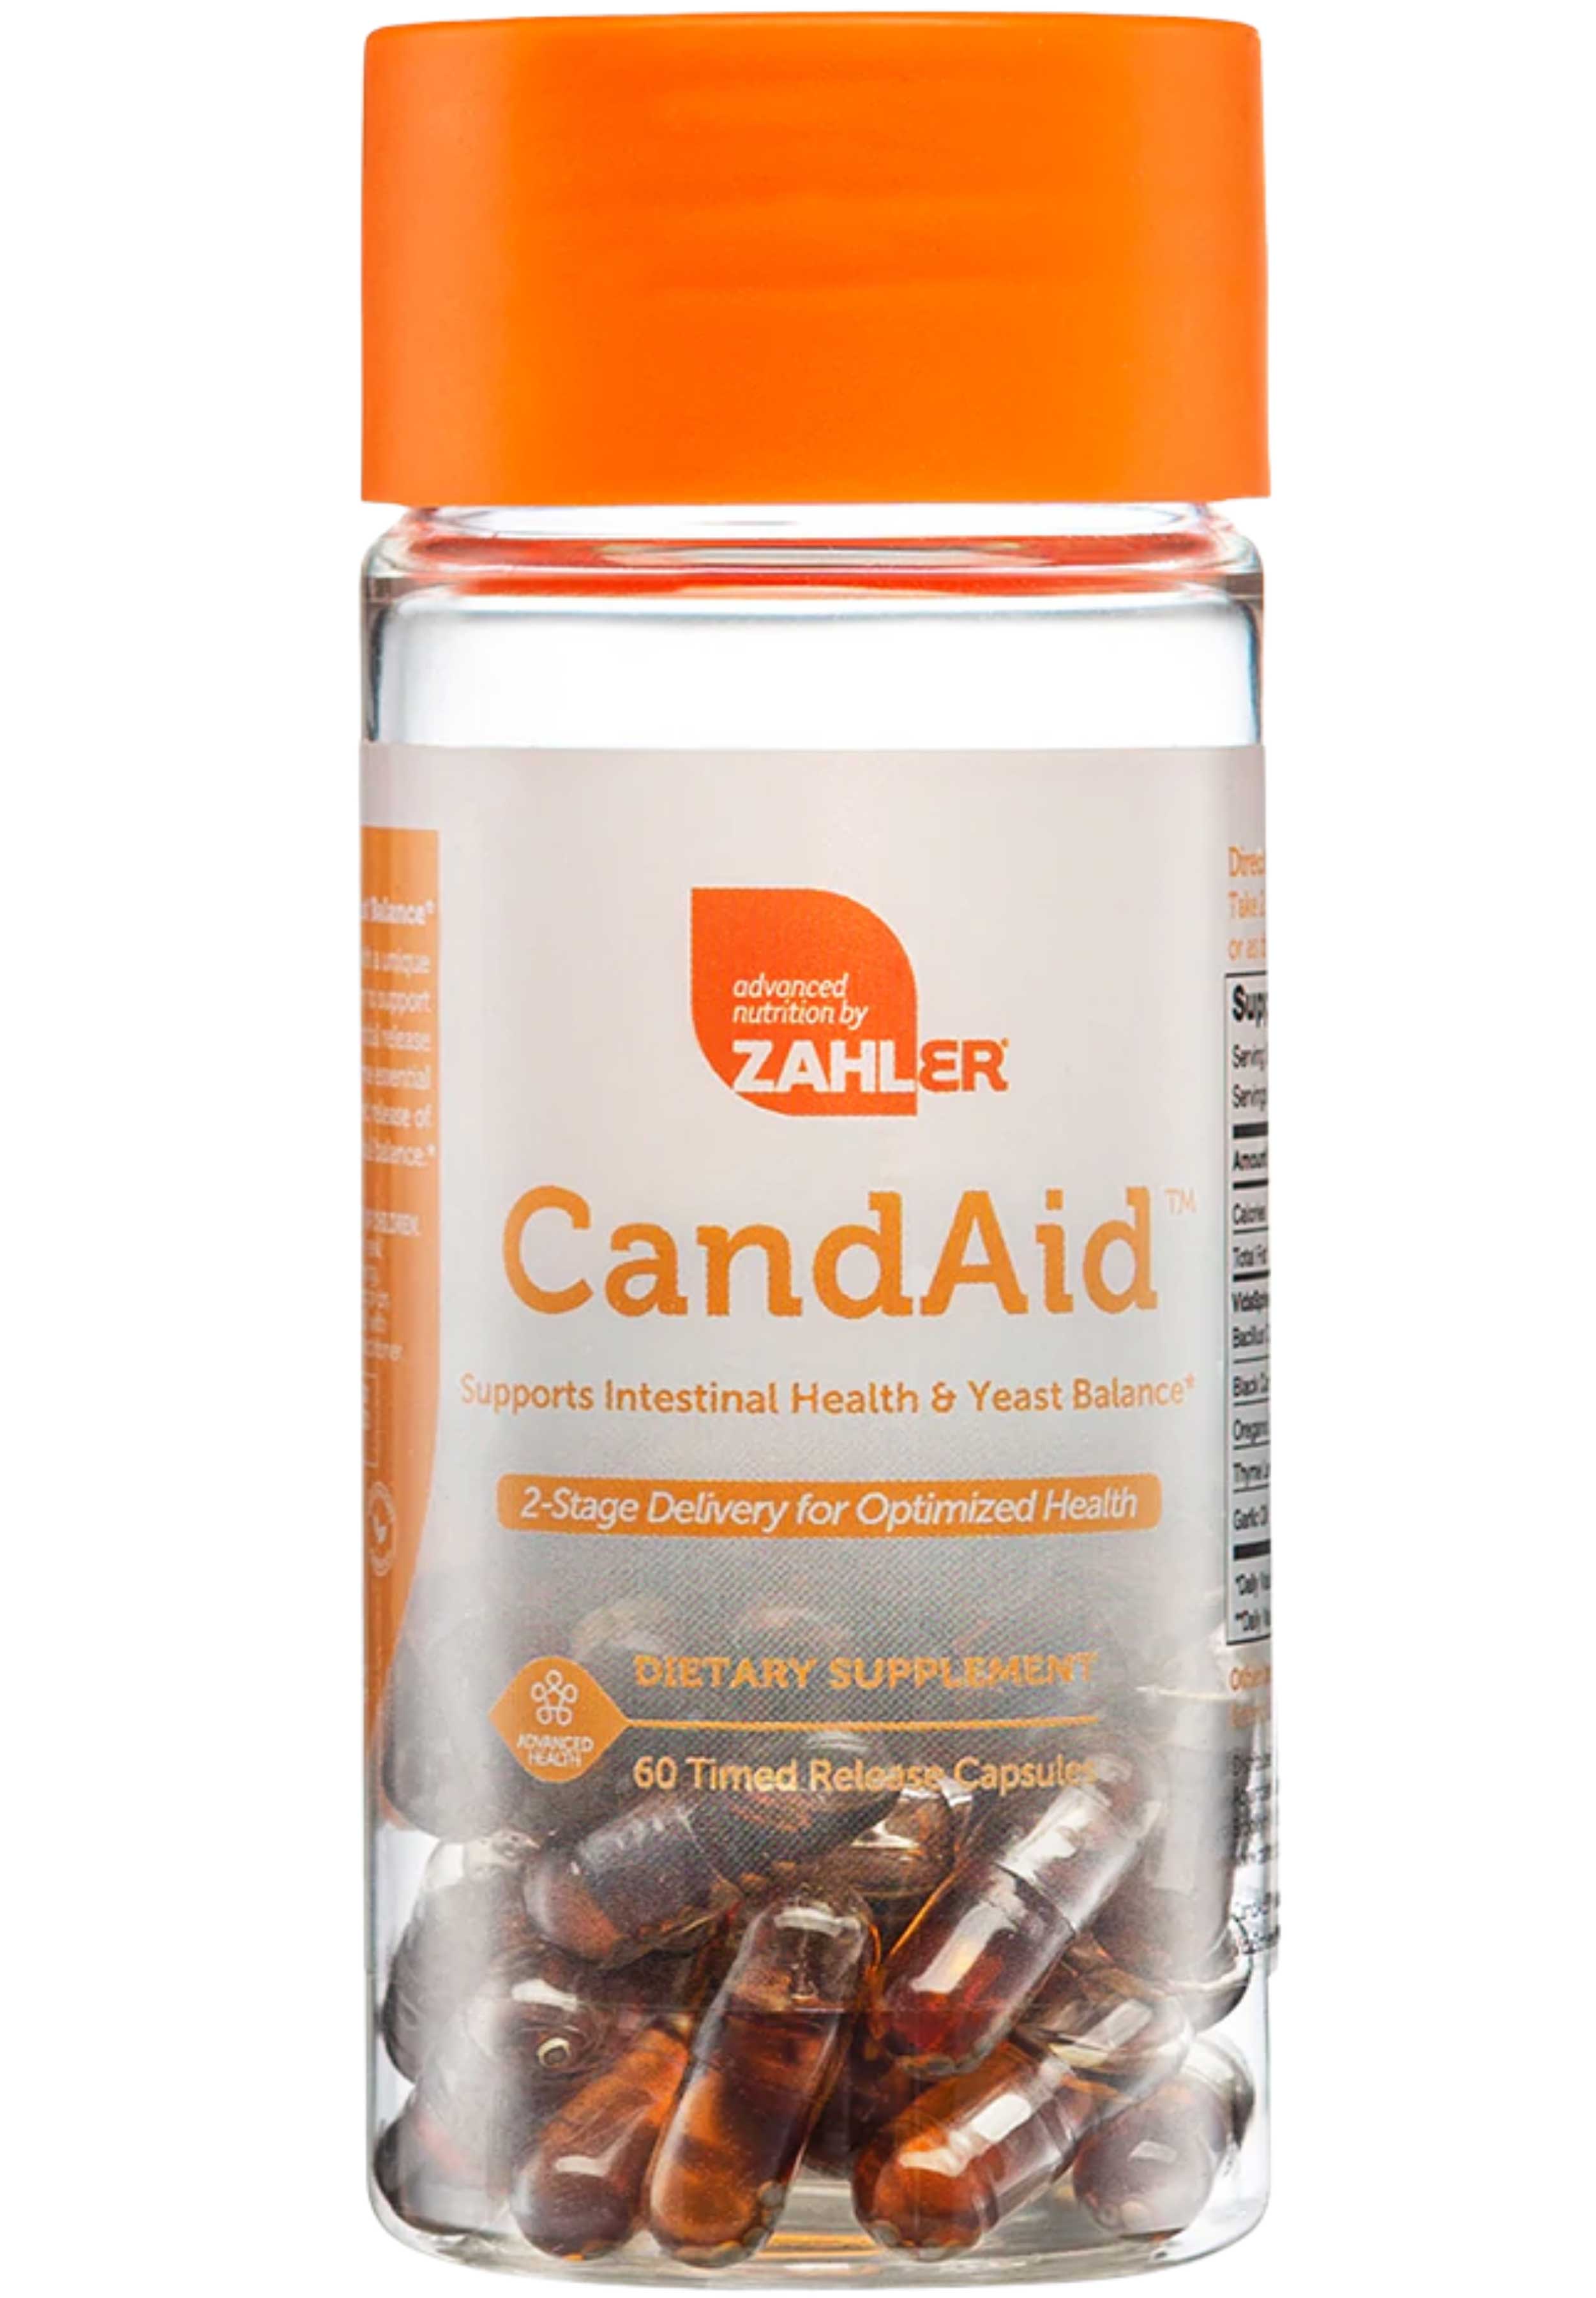 Advanced Nutrition By Zahler CandAid